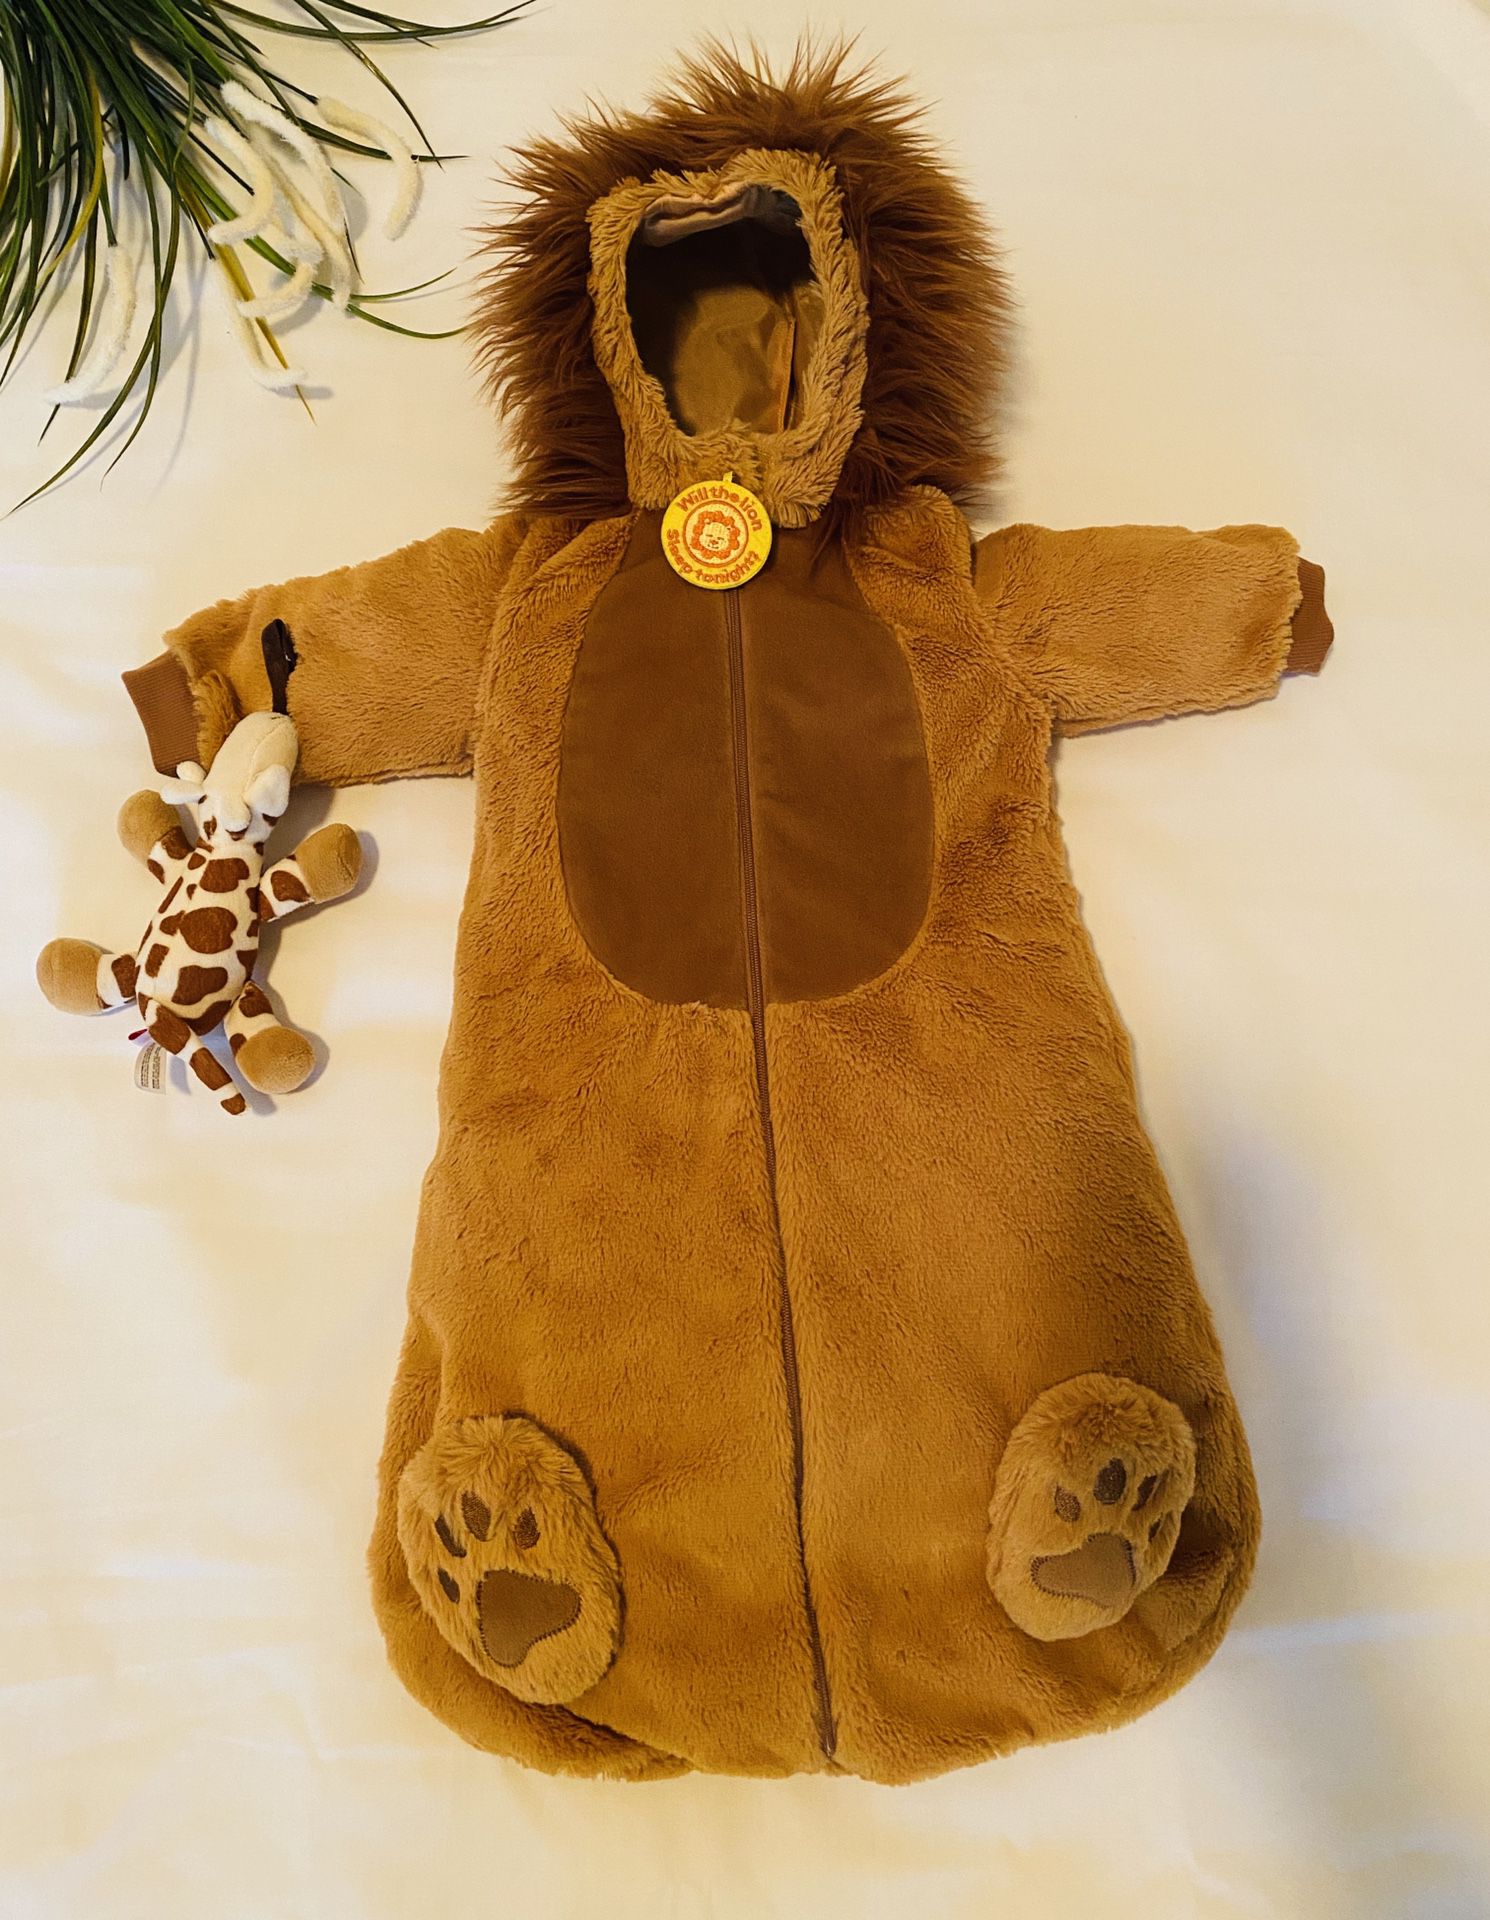 Adorable Baby Lion Cub Costume/Romper!!! Make Your Little One's First Holloween a Hit & the Most Memorable!!!Cute Little King!!! 😊 (GREAT DEAL)